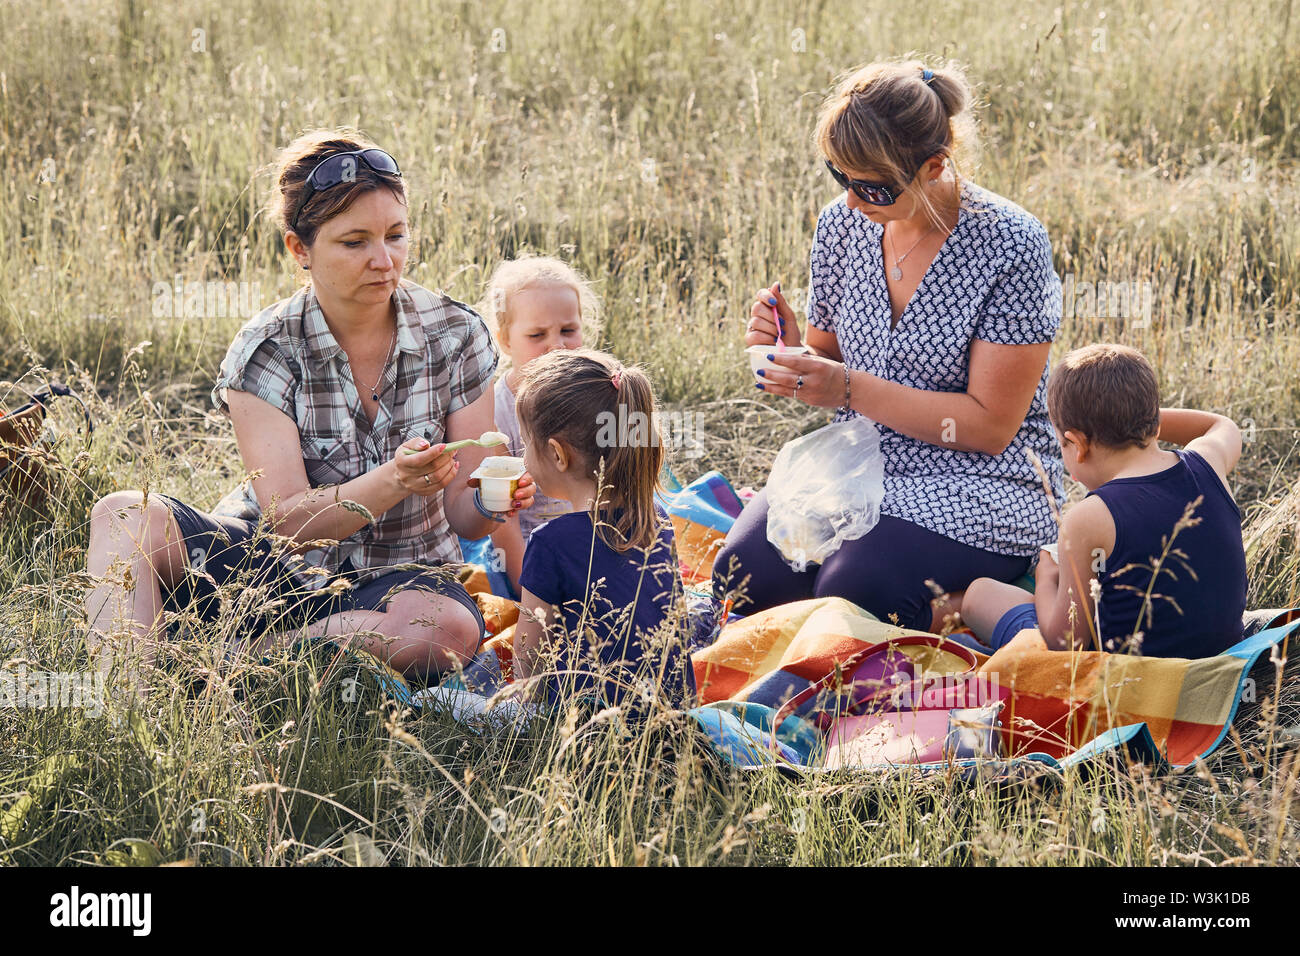 Families and friends spending time together on a meadow, close to nature. Mothers feeding kids, sitting on a blanket, on grass. Candid people, real mo Stock Photo